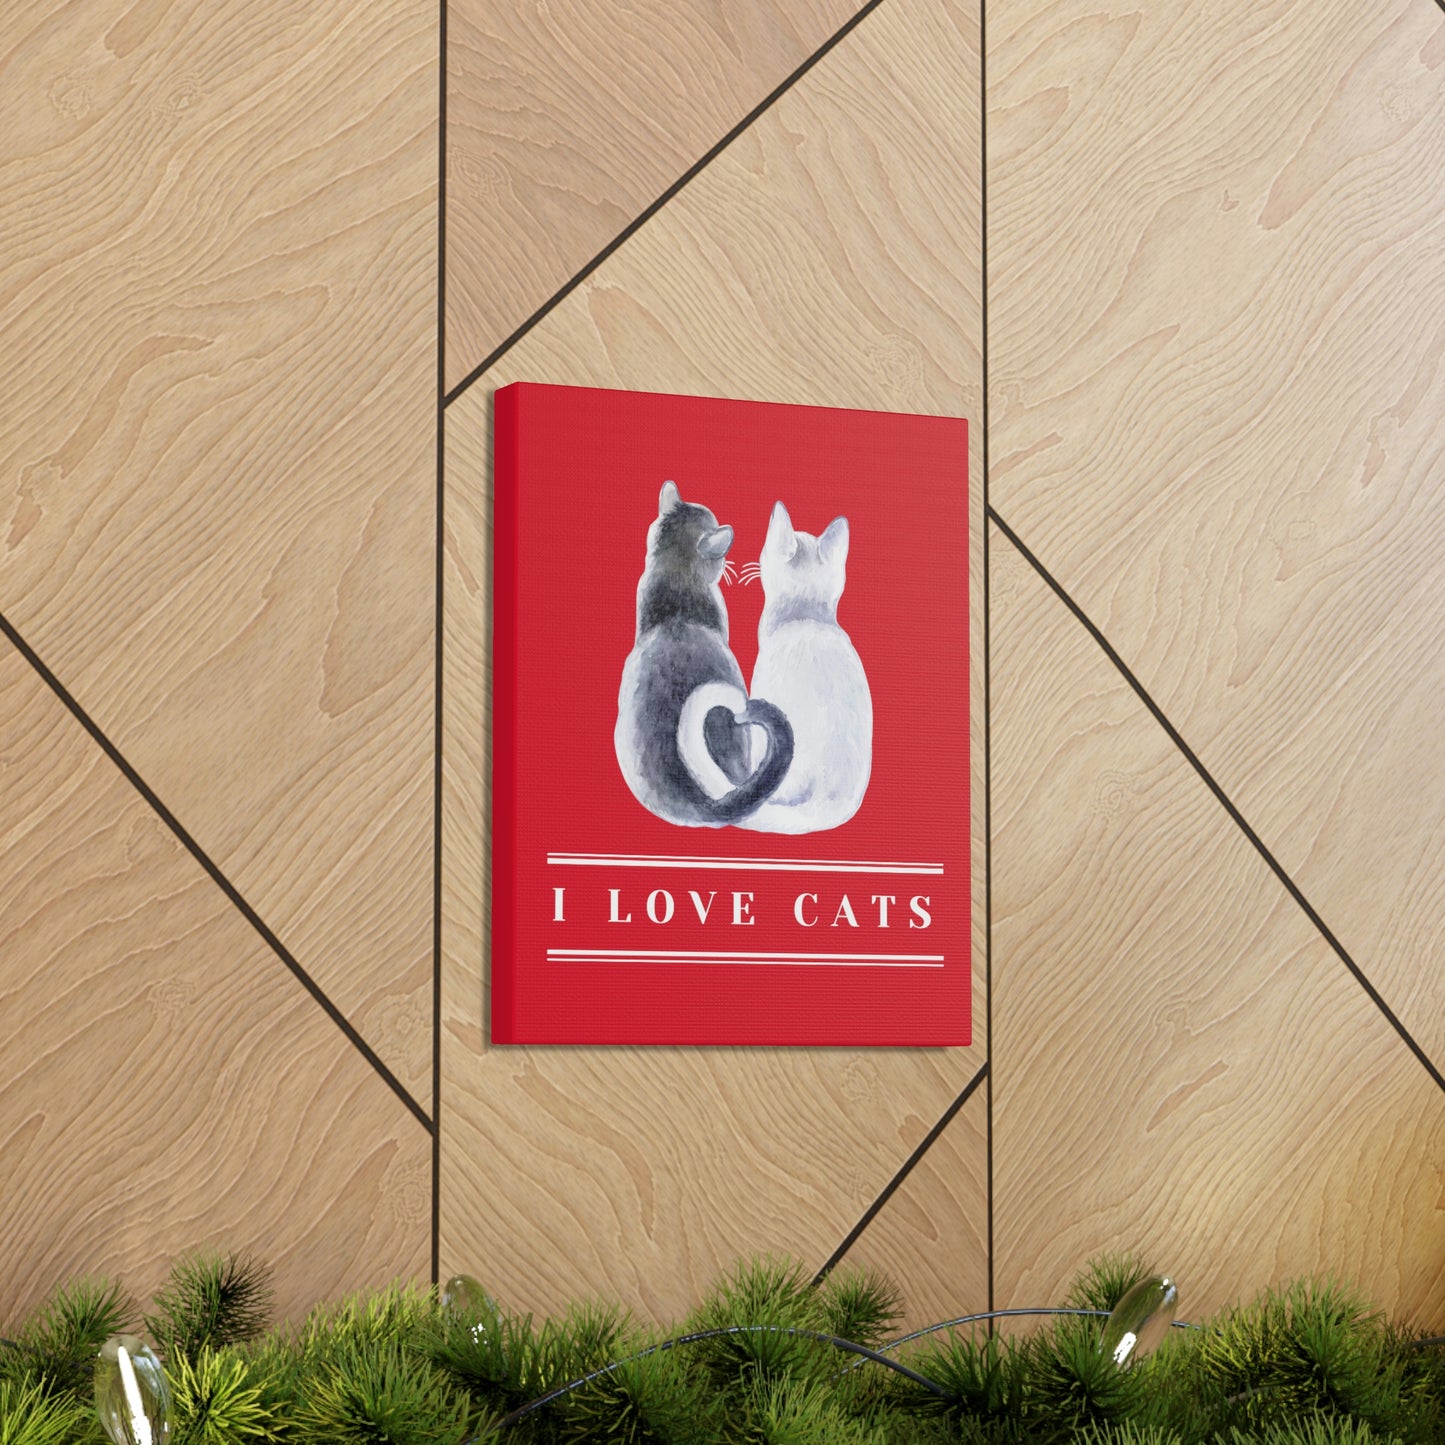 I love cats two heart shaped tails design (Dark Red) Canvas Gallery Wraps poster